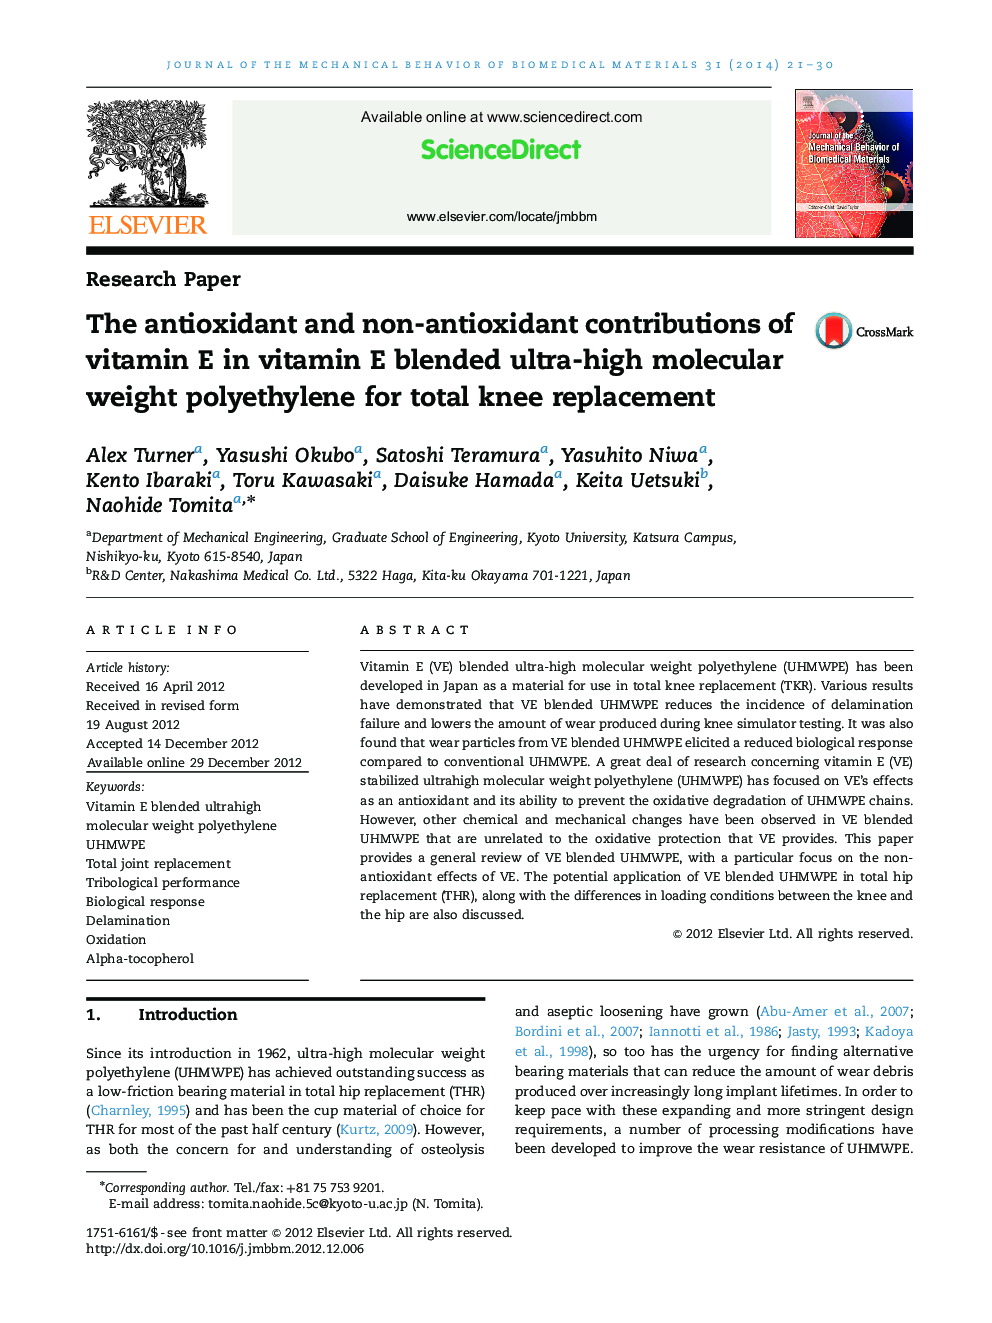 The antioxidant and non-antioxidant contributions of vitamin E in vitamin E blended ultra-high molecular weight polyethylene for total knee replacement